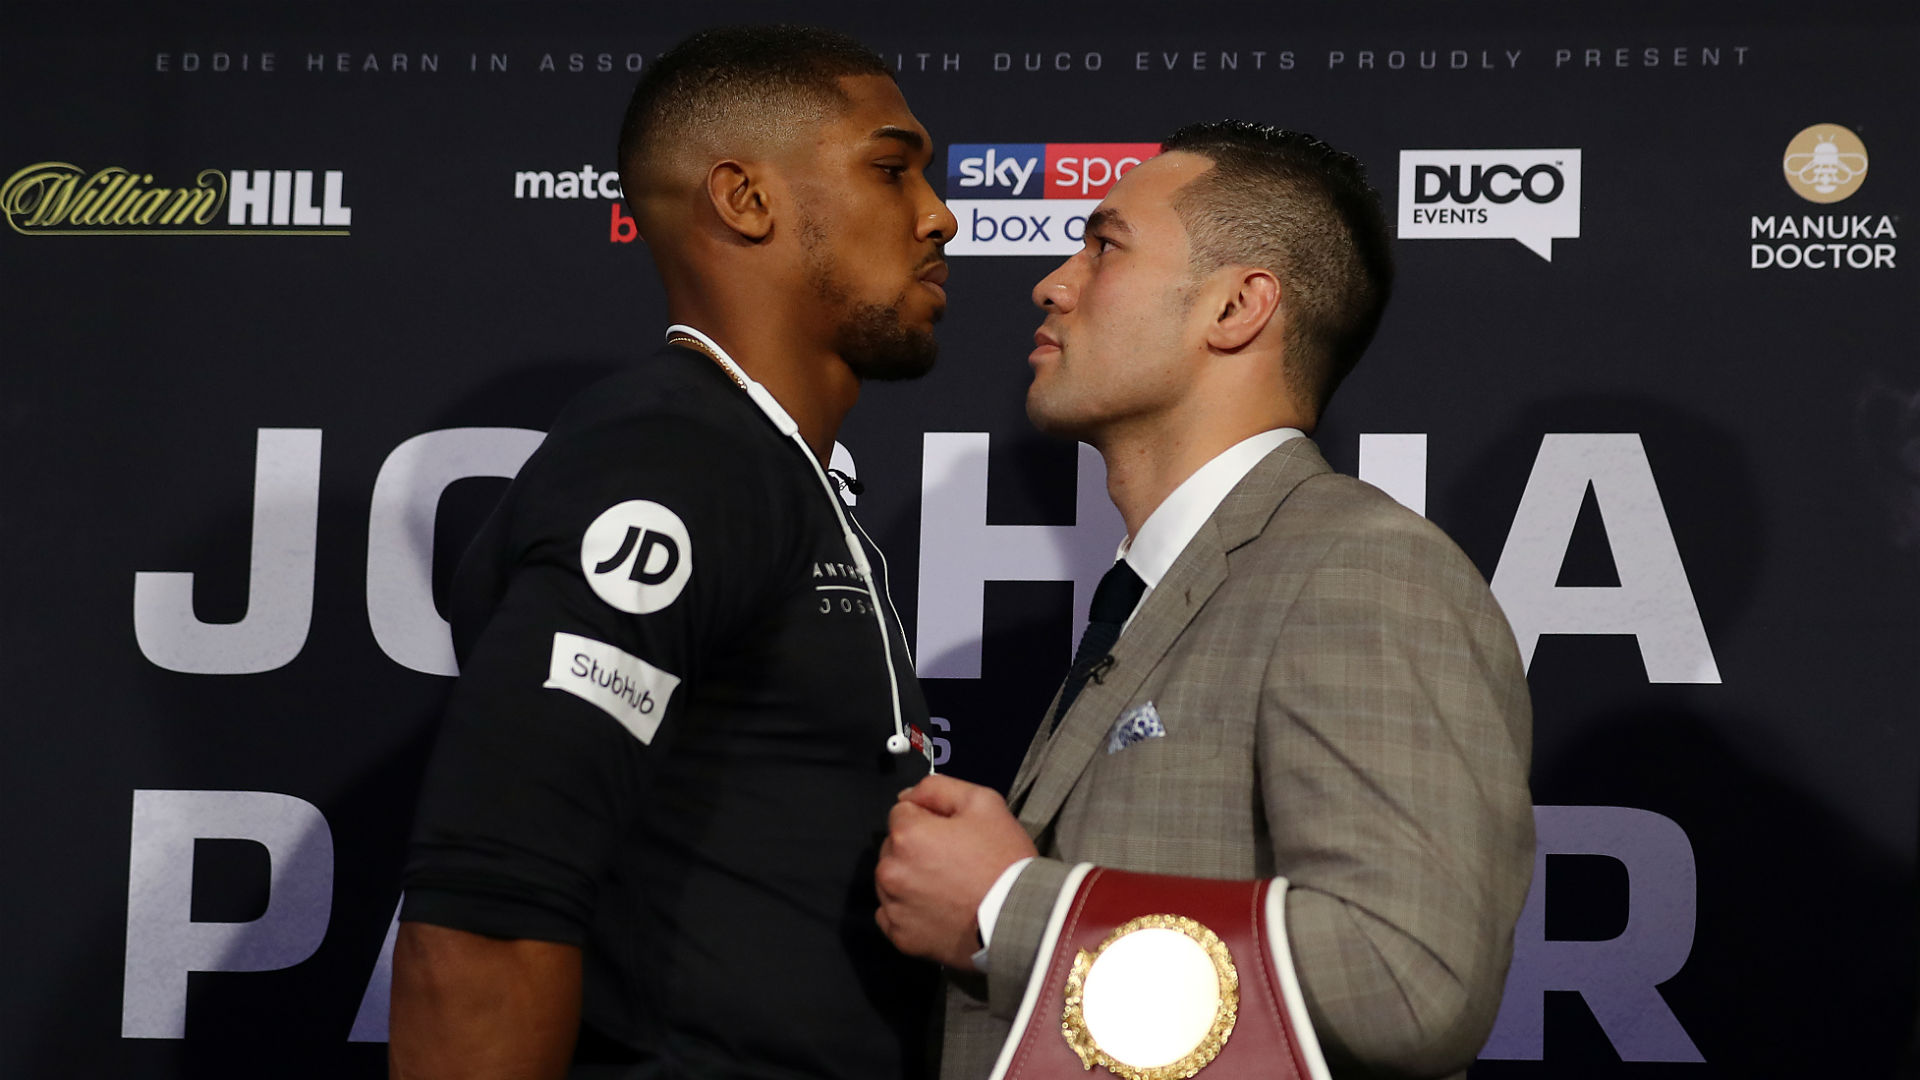 Anthony Joshua may be unbeaten but previous issues against Dillian Whyte and Wladimir Klitschko should give Joseph Parker belief.